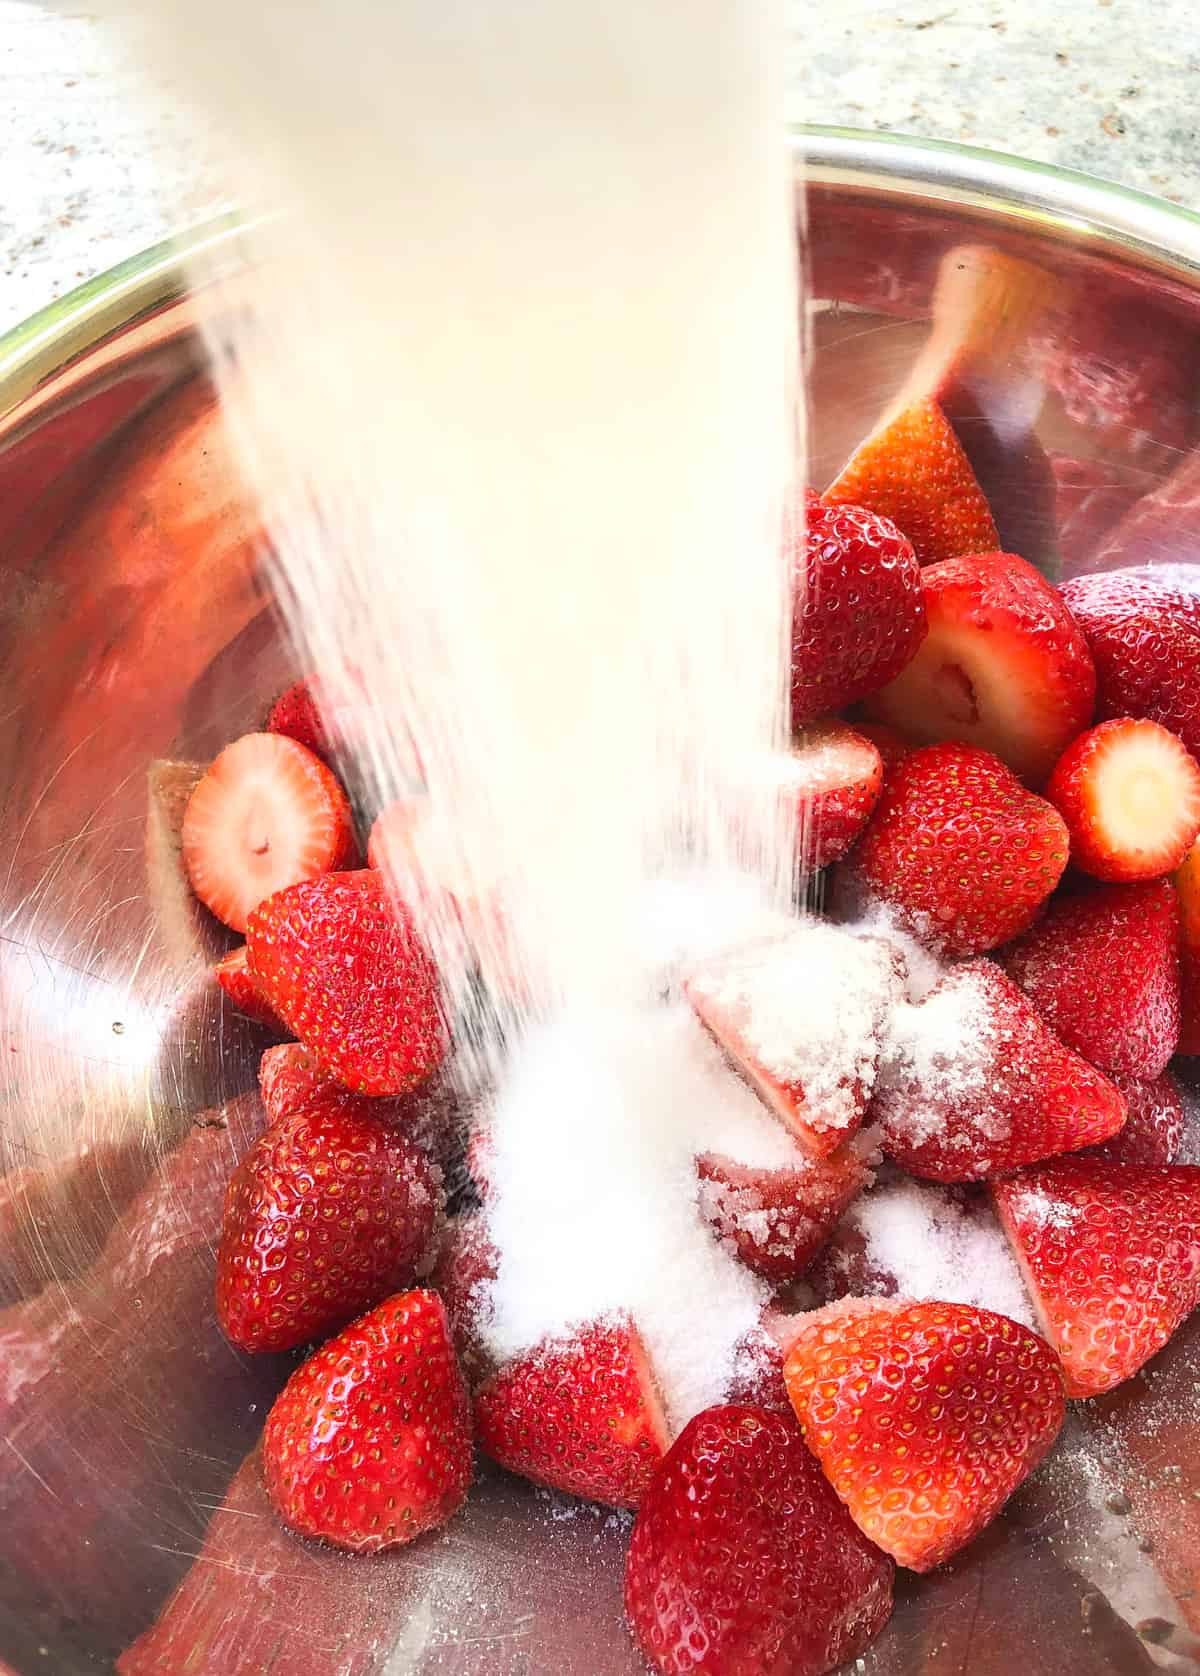 Pour the sugar over the top of the strawberries and stir to mix.